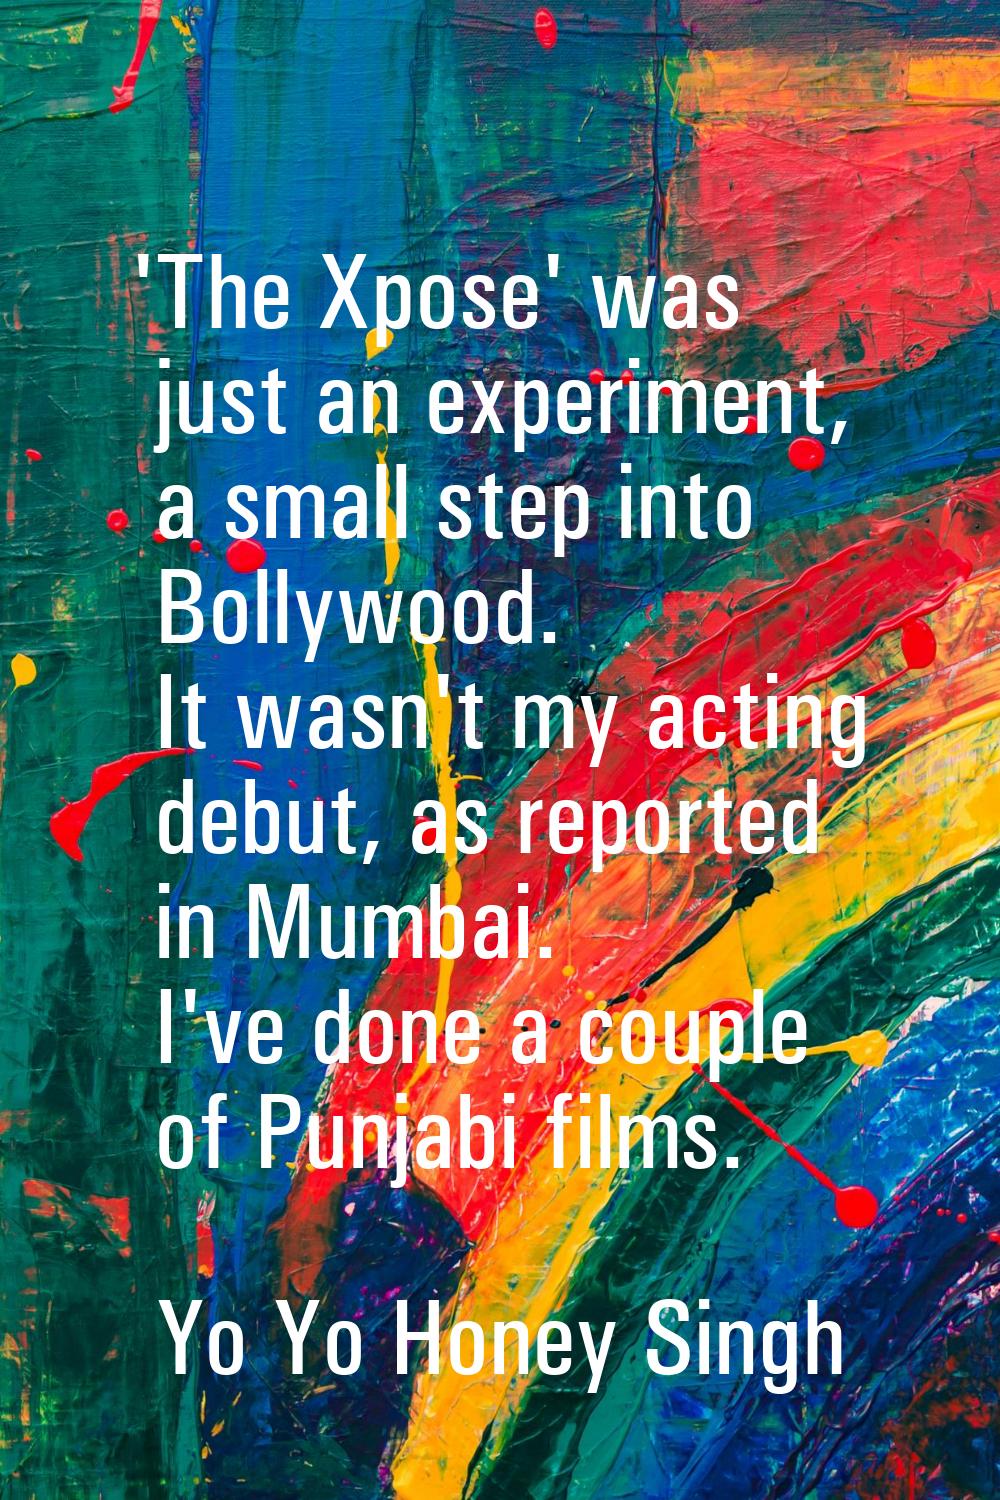 'The Xpose' was just an experiment, a small step into Bollywood. It wasn't my acting debut, as repo